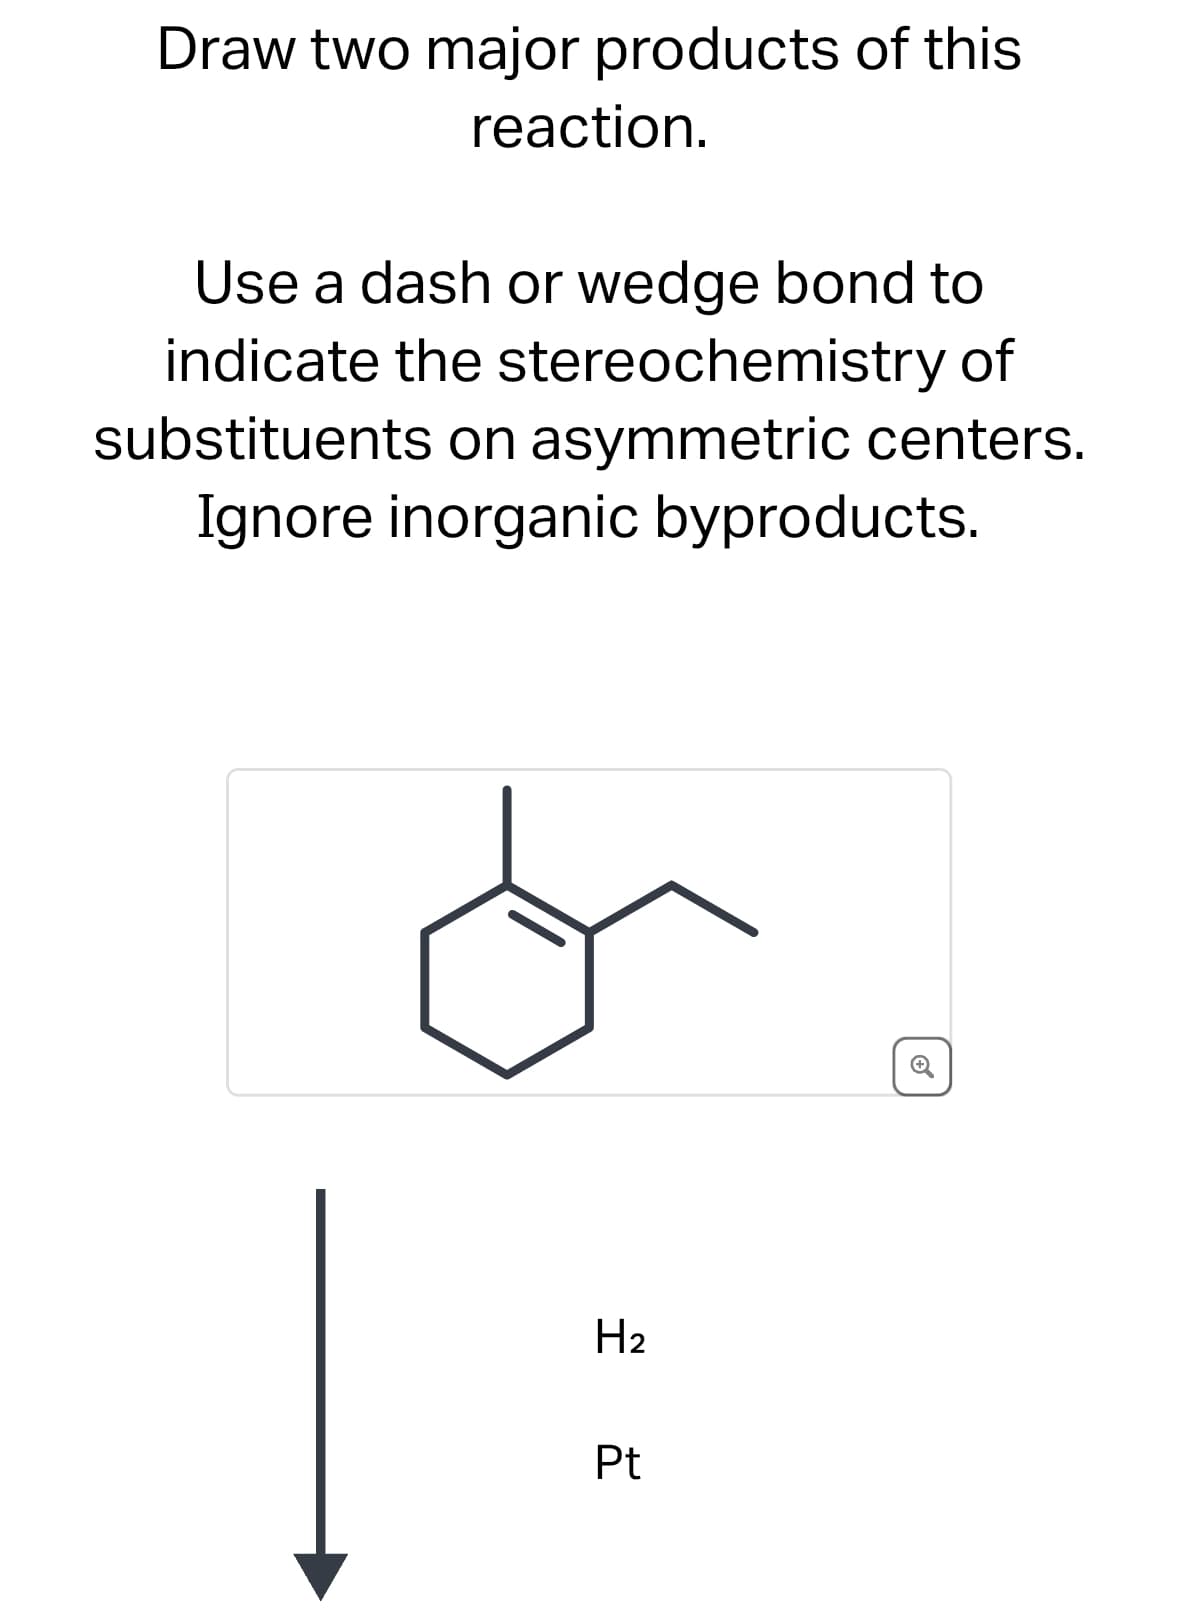 Draw two major products of this
reaction.
Use a dash or wedge bond to
indicate the stereochemistry of
substituents on asymmetric centers.
Ignore inorganic byproducts.
H2
Pt
⑤